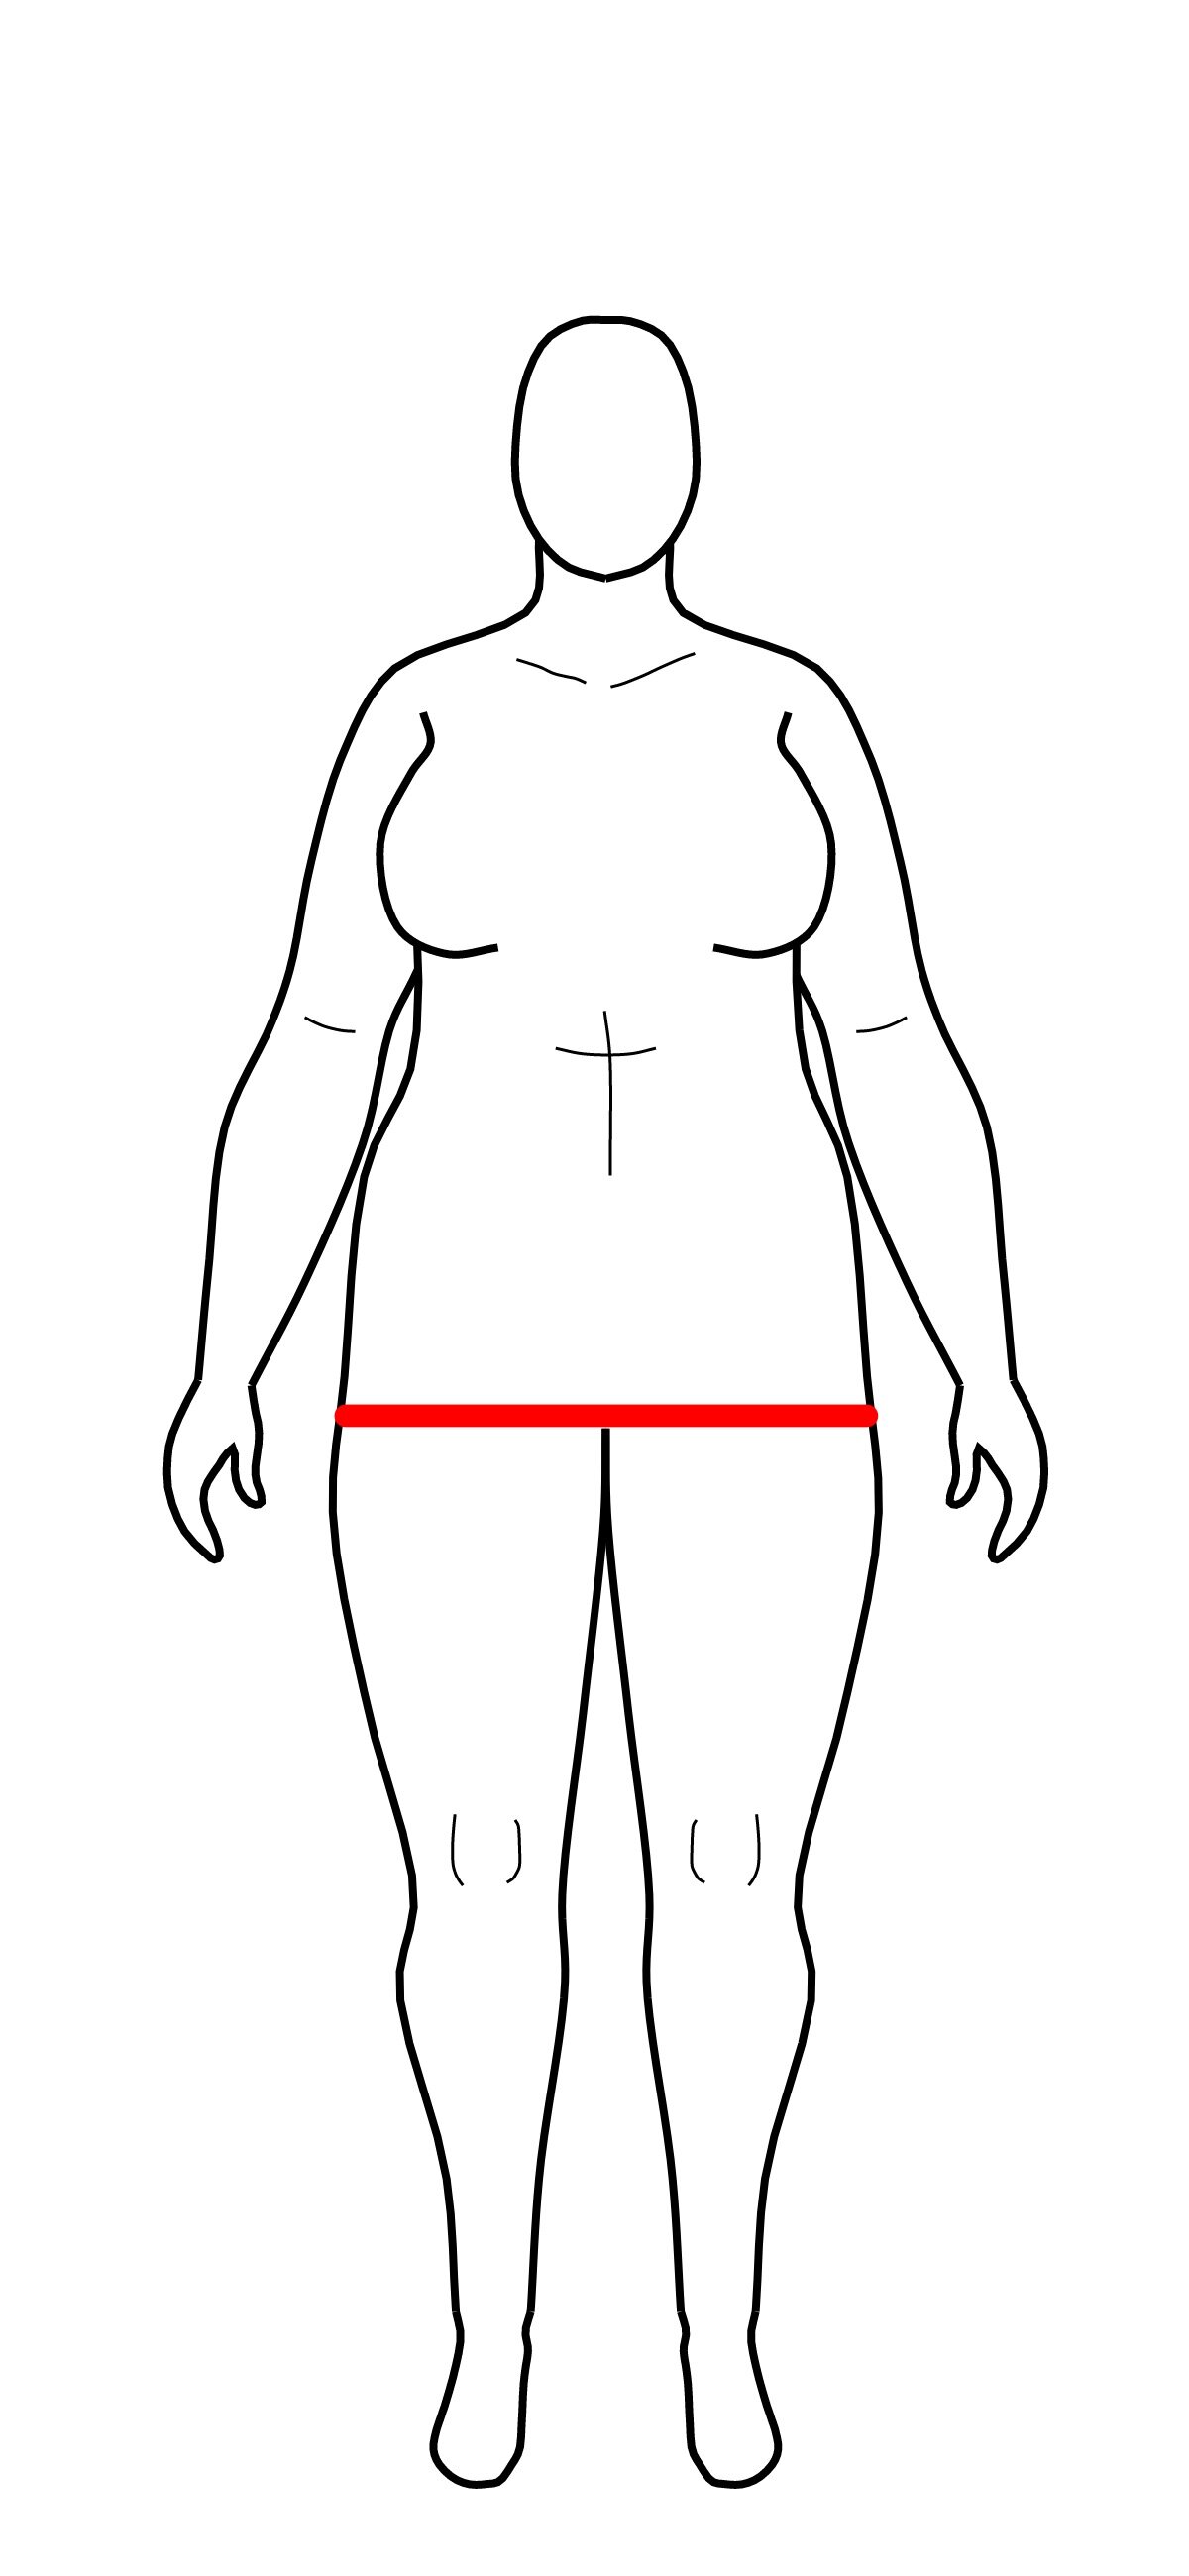 Full hip circumference with bra (Copy)